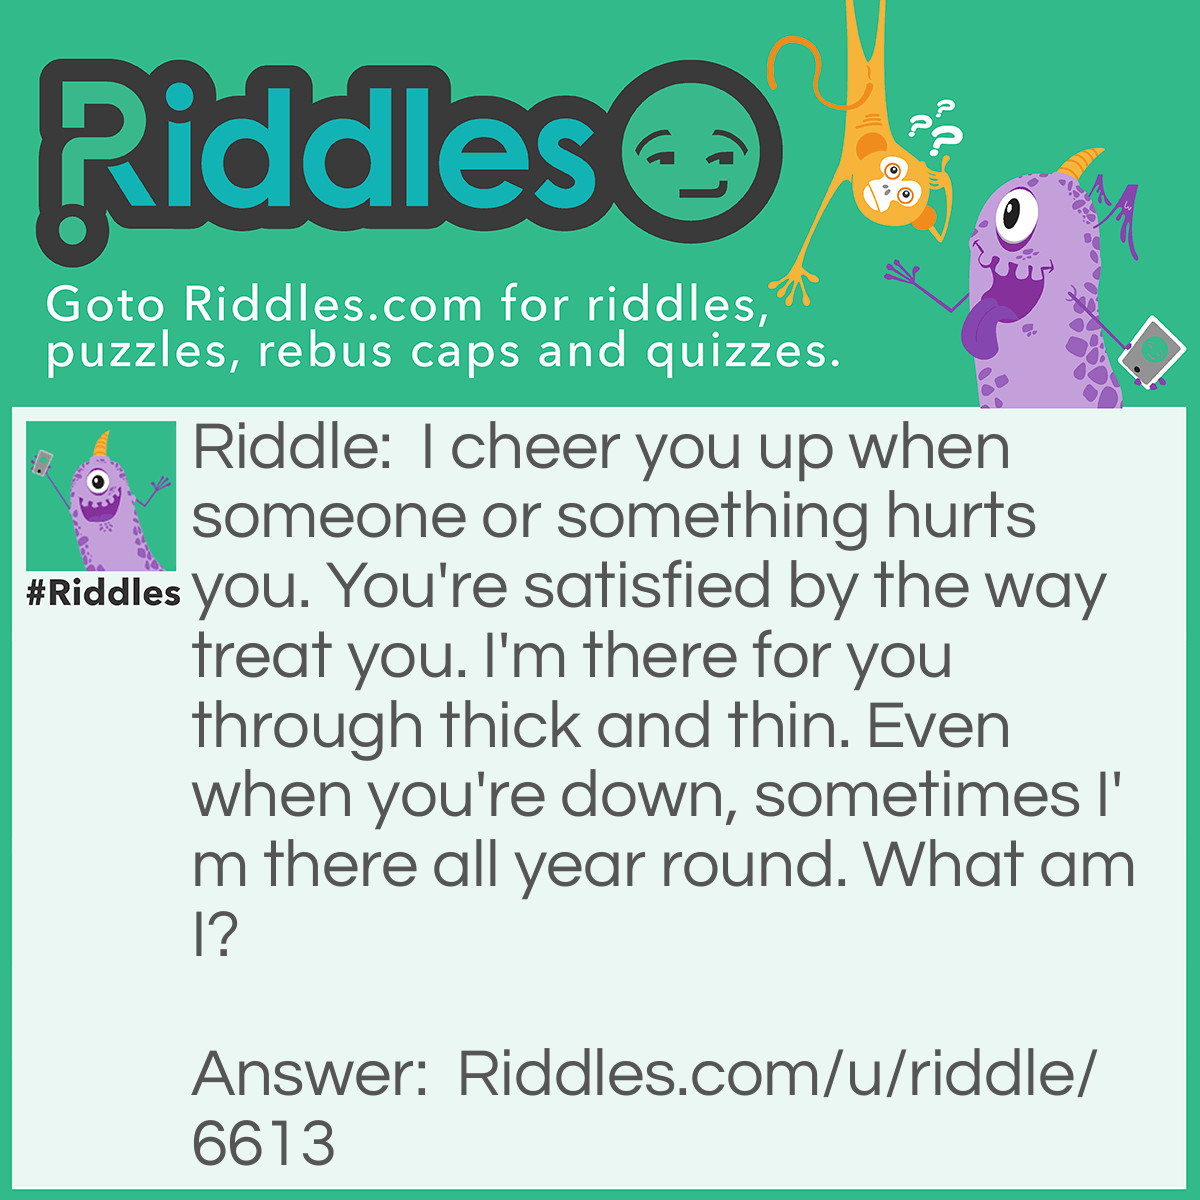 Riddle: I cheer you up when someone or something hurts you. You're satisfied by the way treat you. I'm there for you through thick and thin. Even when you're down, sometimes I'm there all year round. What am I? Answer: Cake.